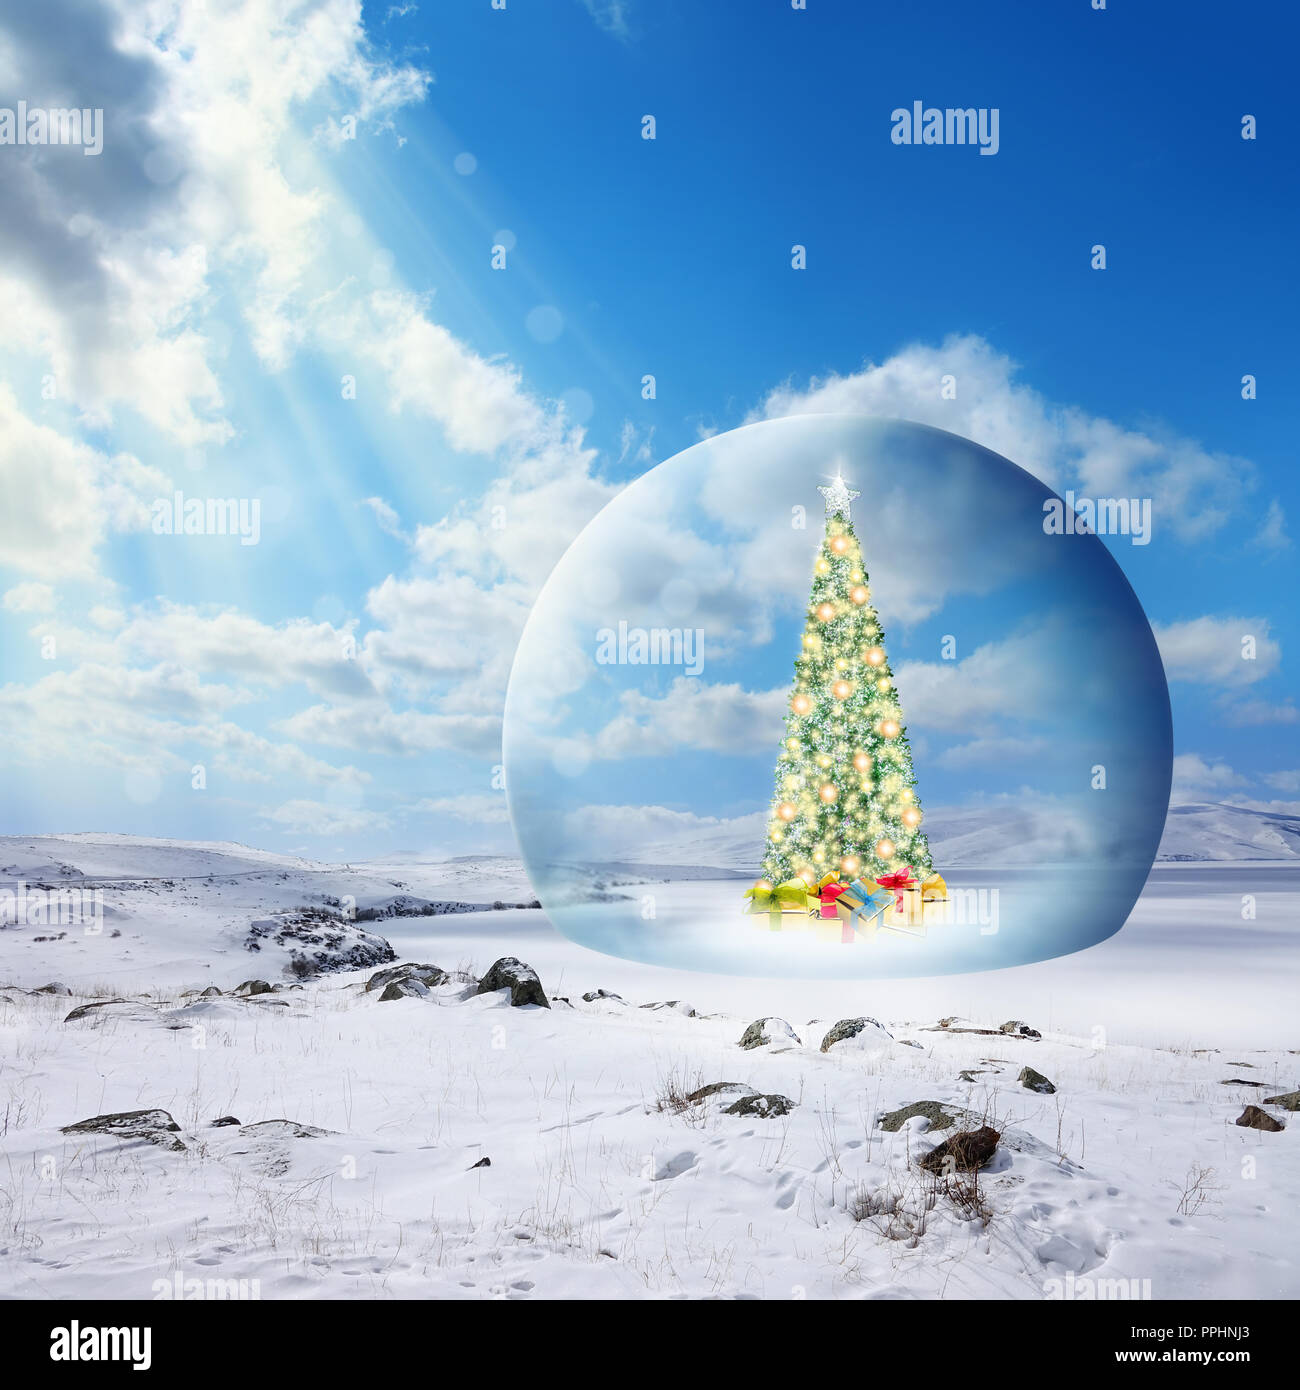 Elegant Christmas Tree Decorated With Glistening Glass Balls, A